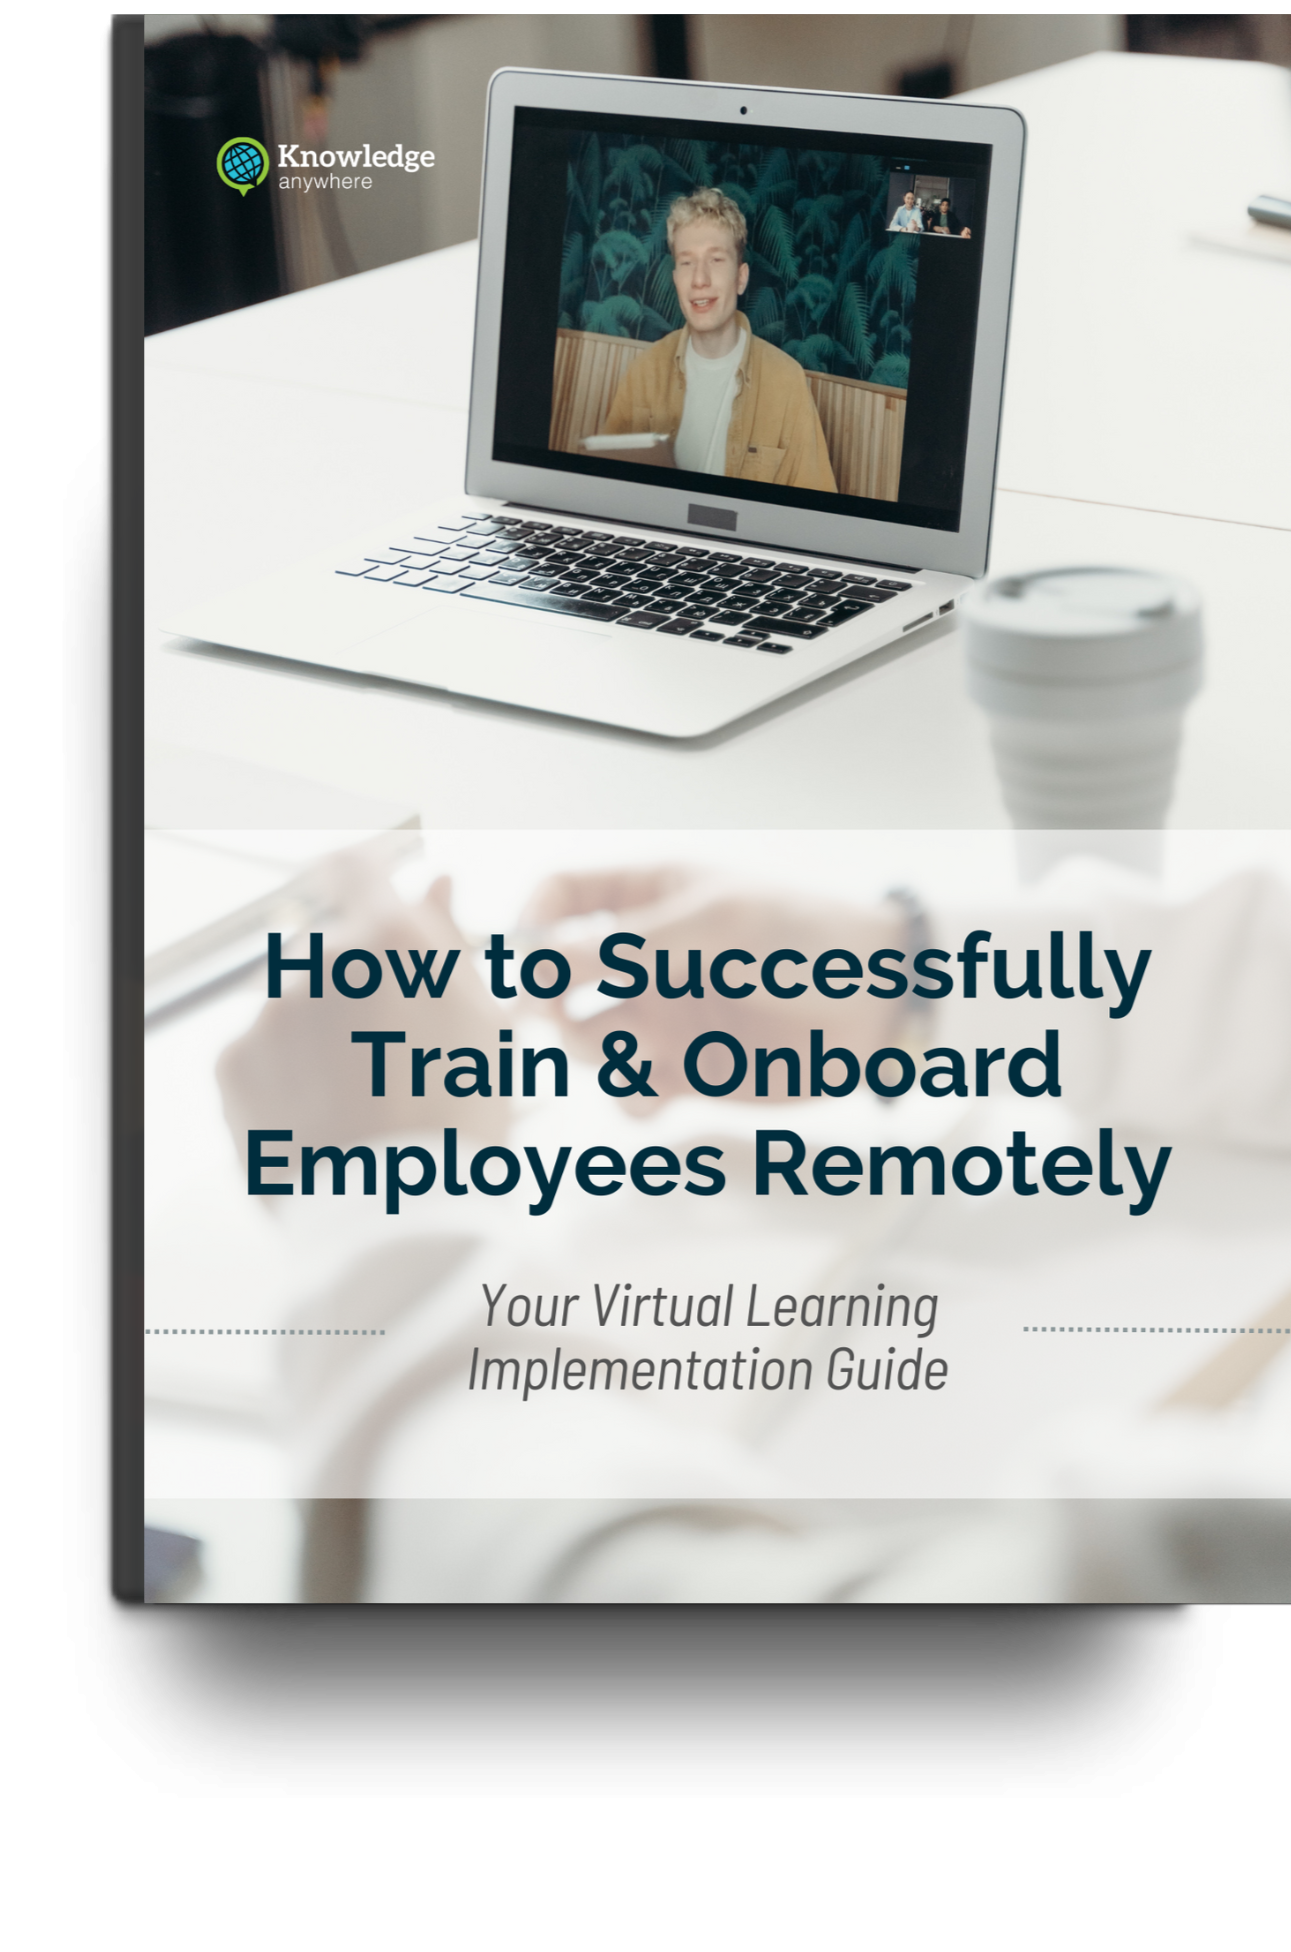 How to Successfully Train & Onboard Employees Remotely